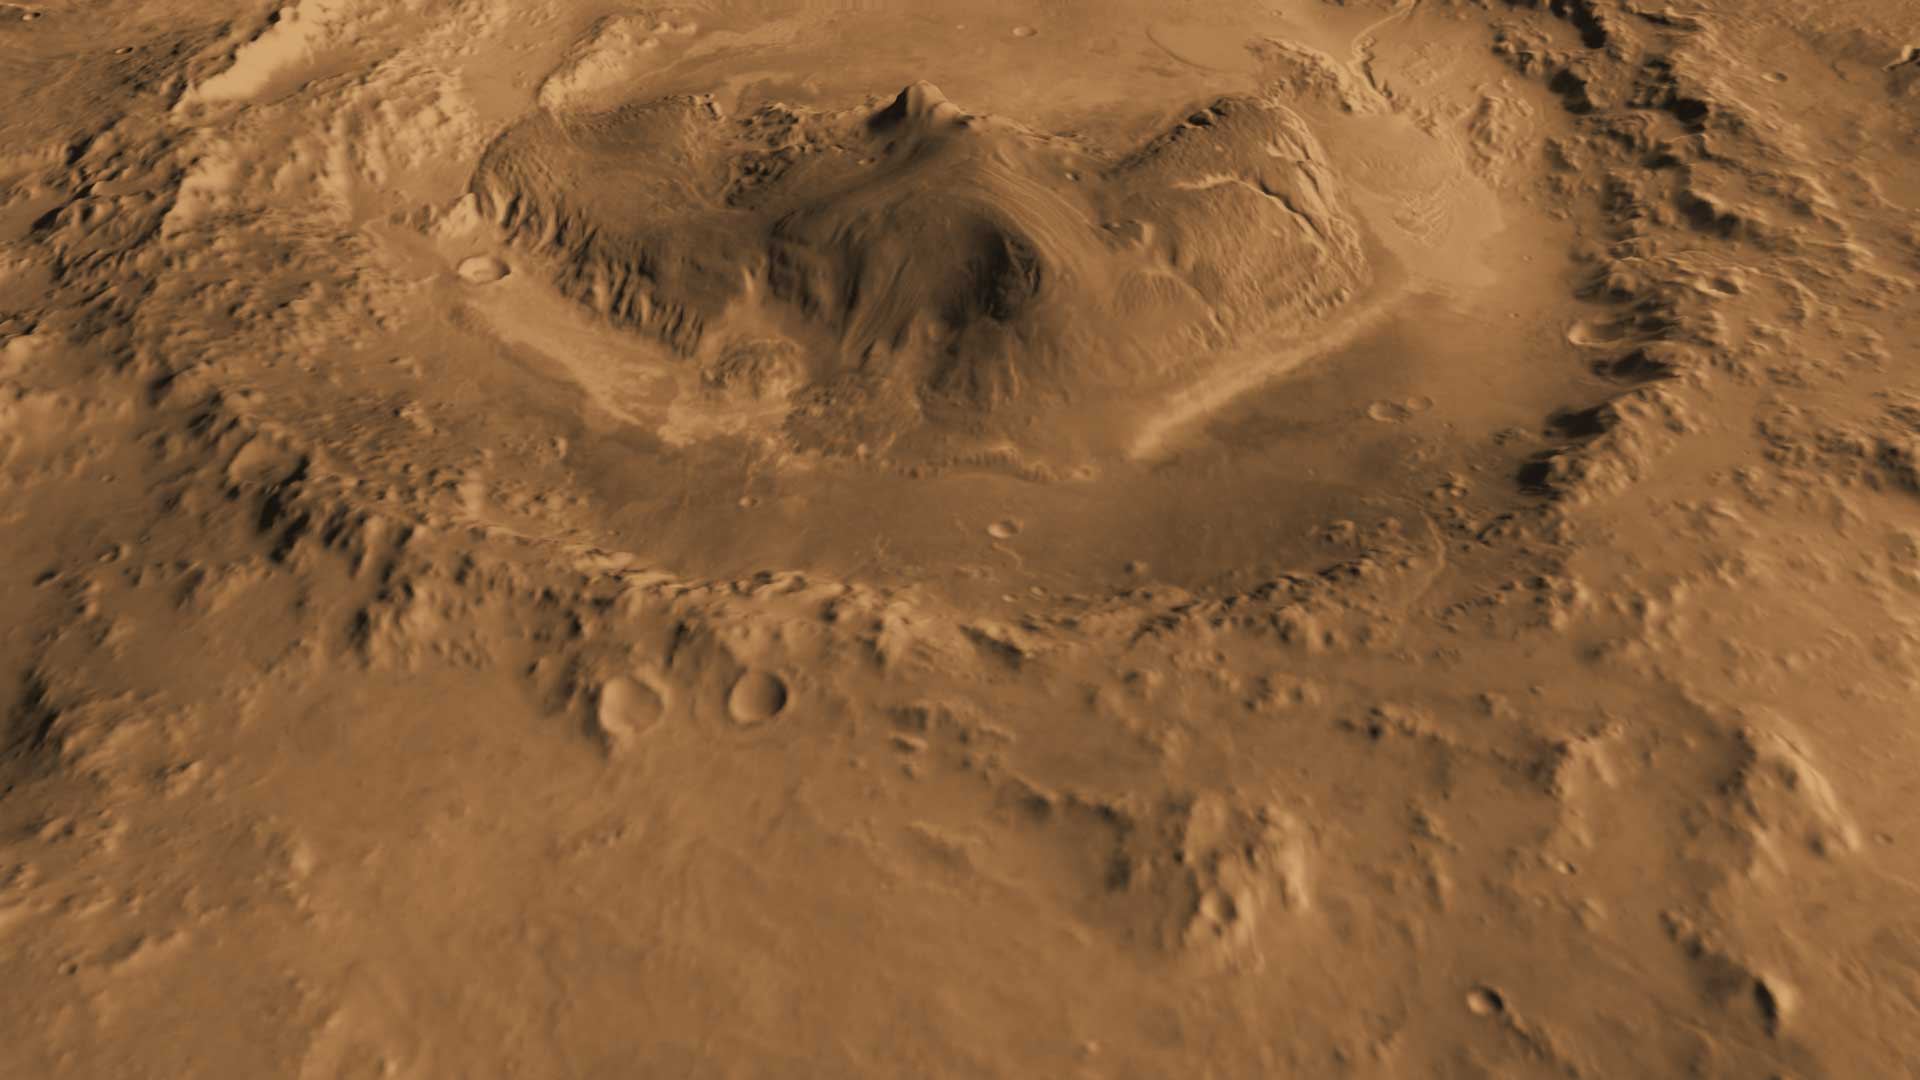 This computer-generated view based on multiple orbital observations shows Mars' Gale crater as if seen from an aircraft north of the crater.